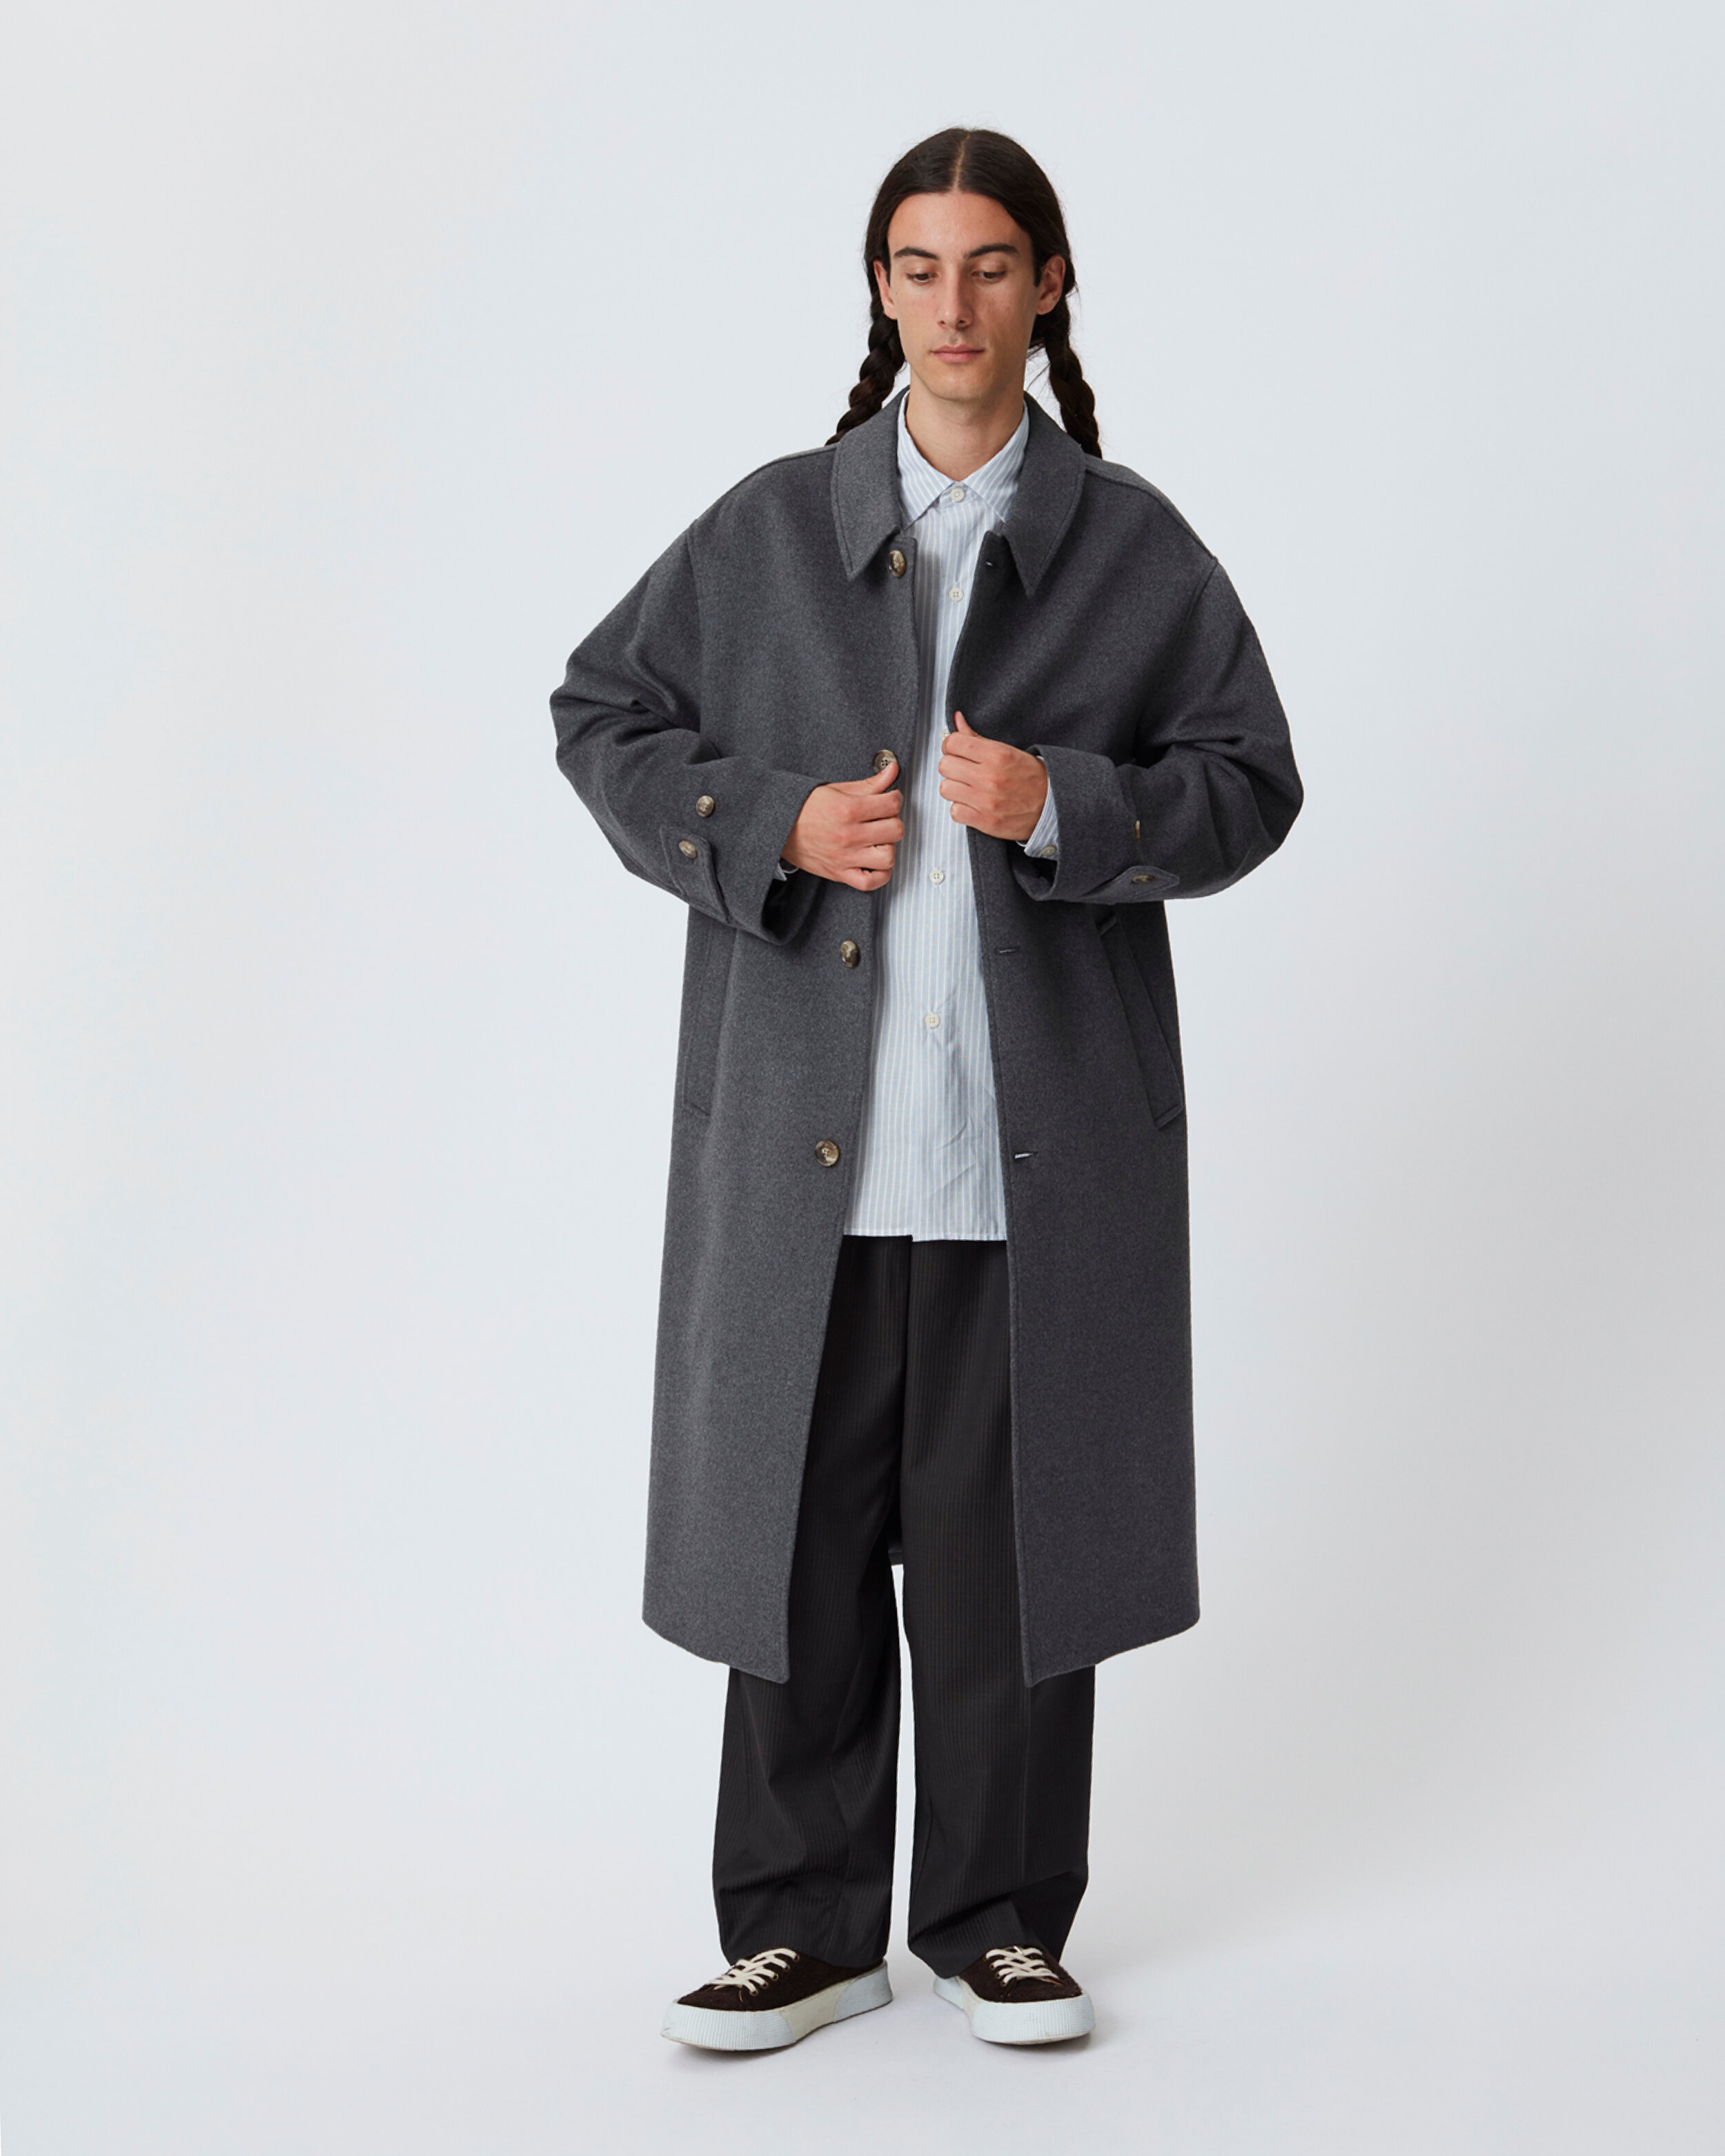 mfpen Debuts Strong Tailoring And Winter Coats With Second AW20 ...